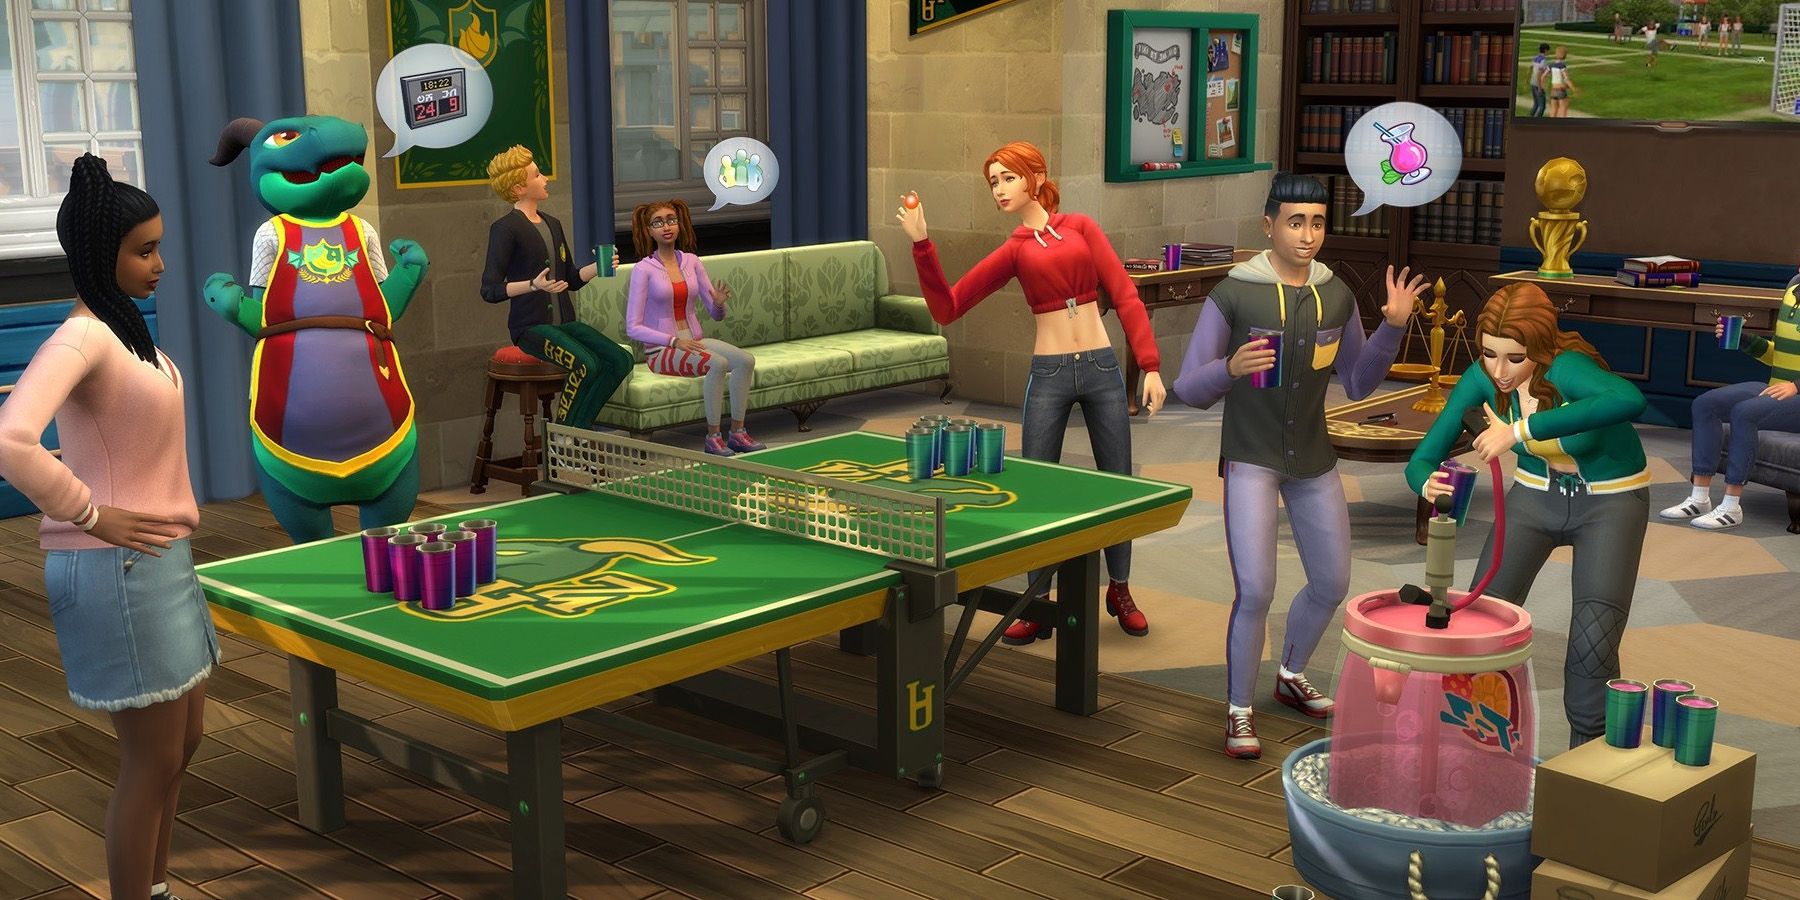 The Sims Might Get a Competitor From Paradox
Tectonic